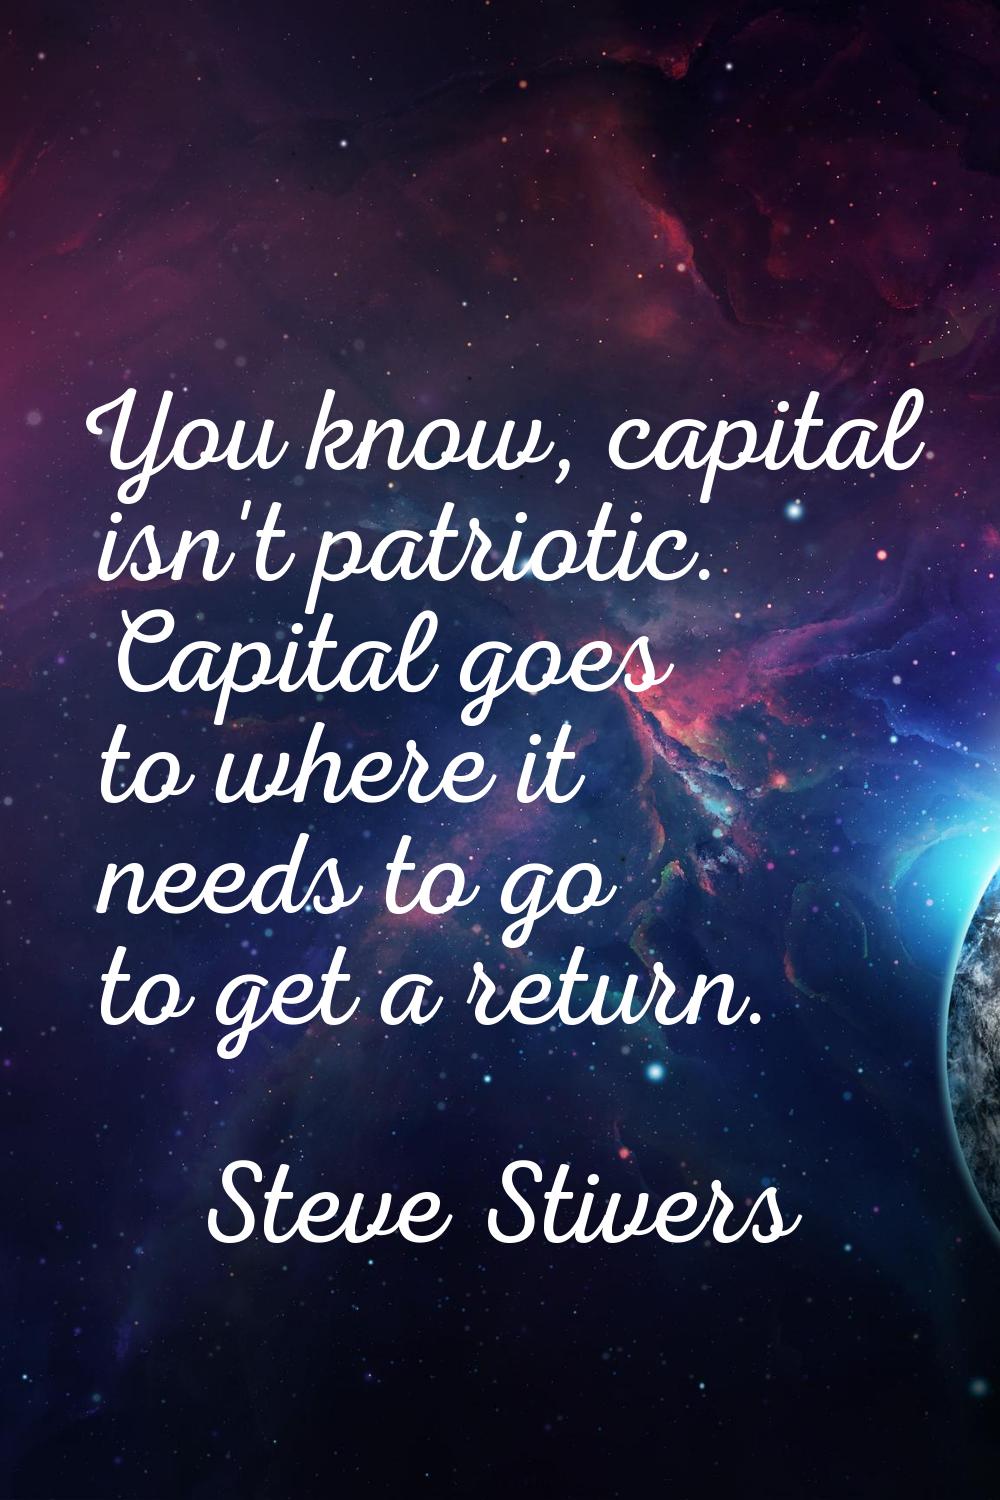 You know, capital isn't patriotic. Capital goes to where it needs to go to get a return.